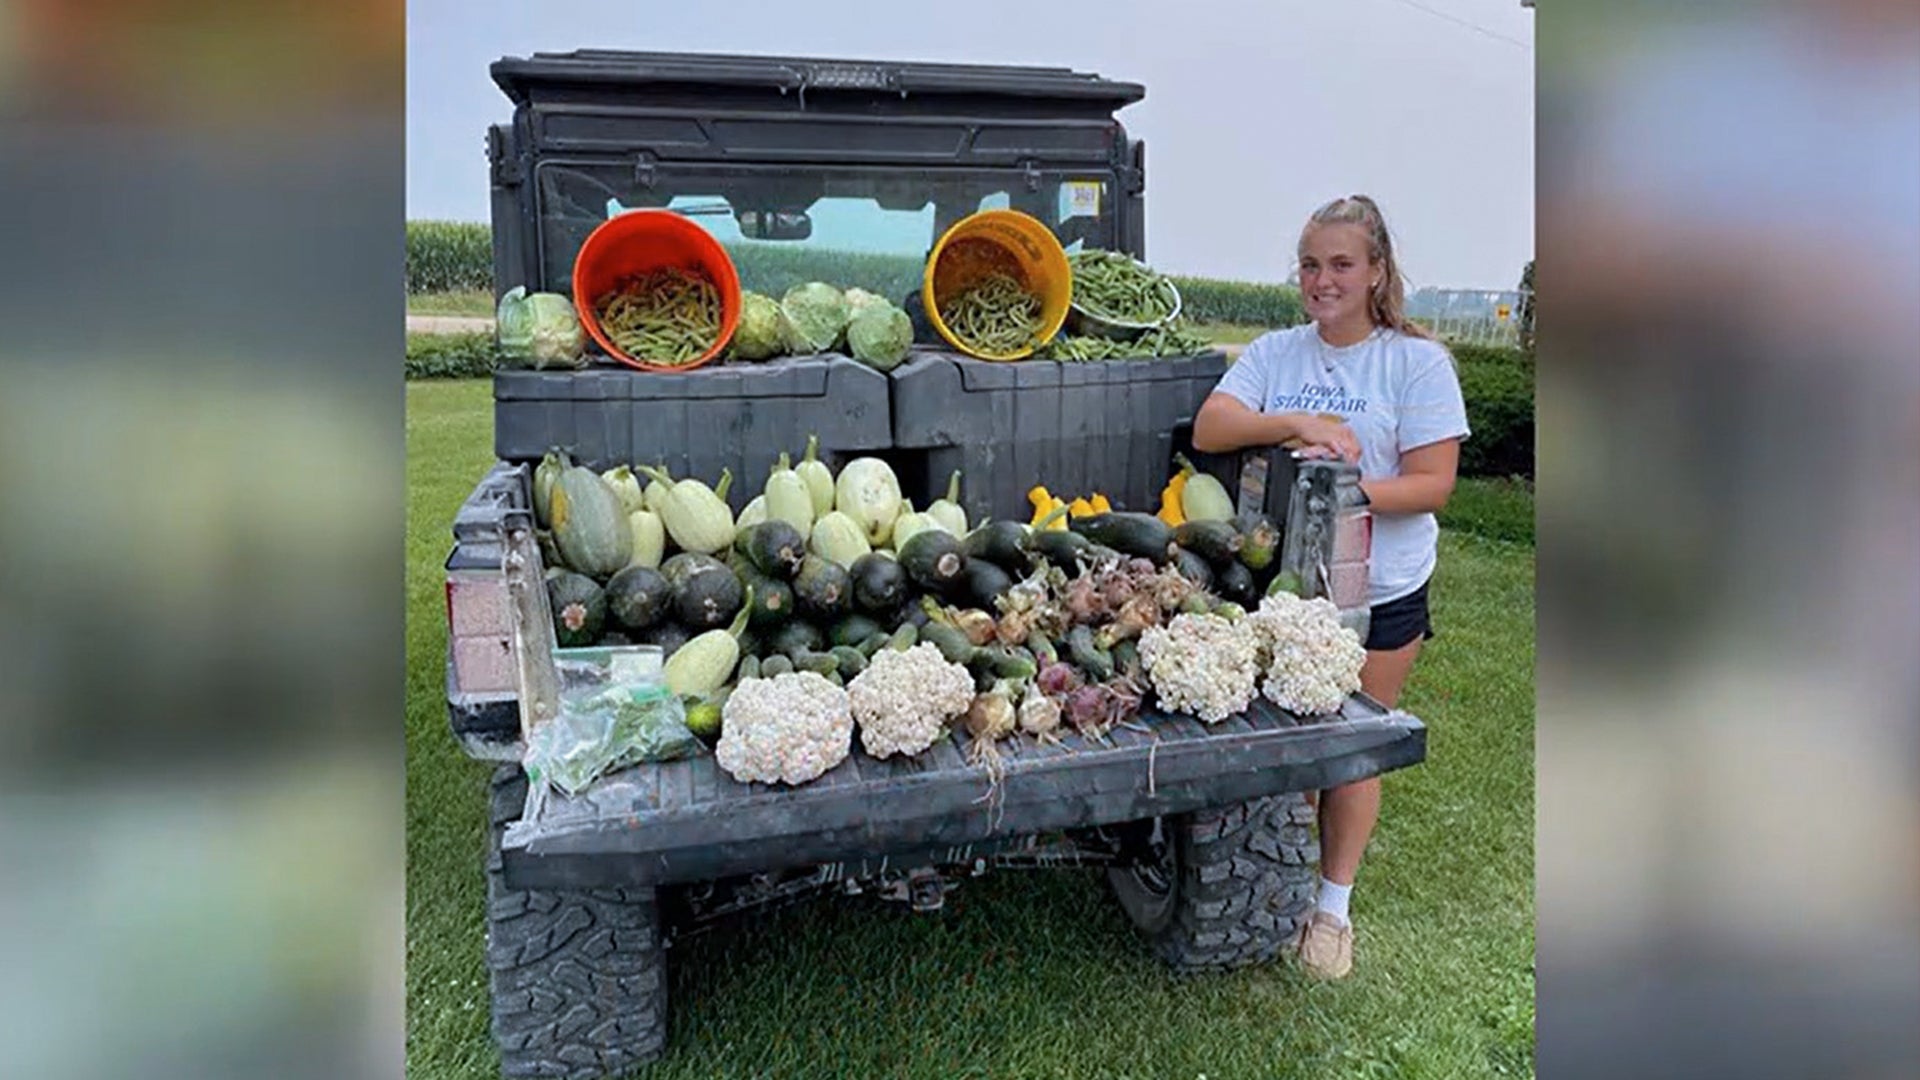 SOME GOOD NEWS: Iowa Teen Grows 7,000 Pounds of Veggies, Gives It All Away to Food Banks